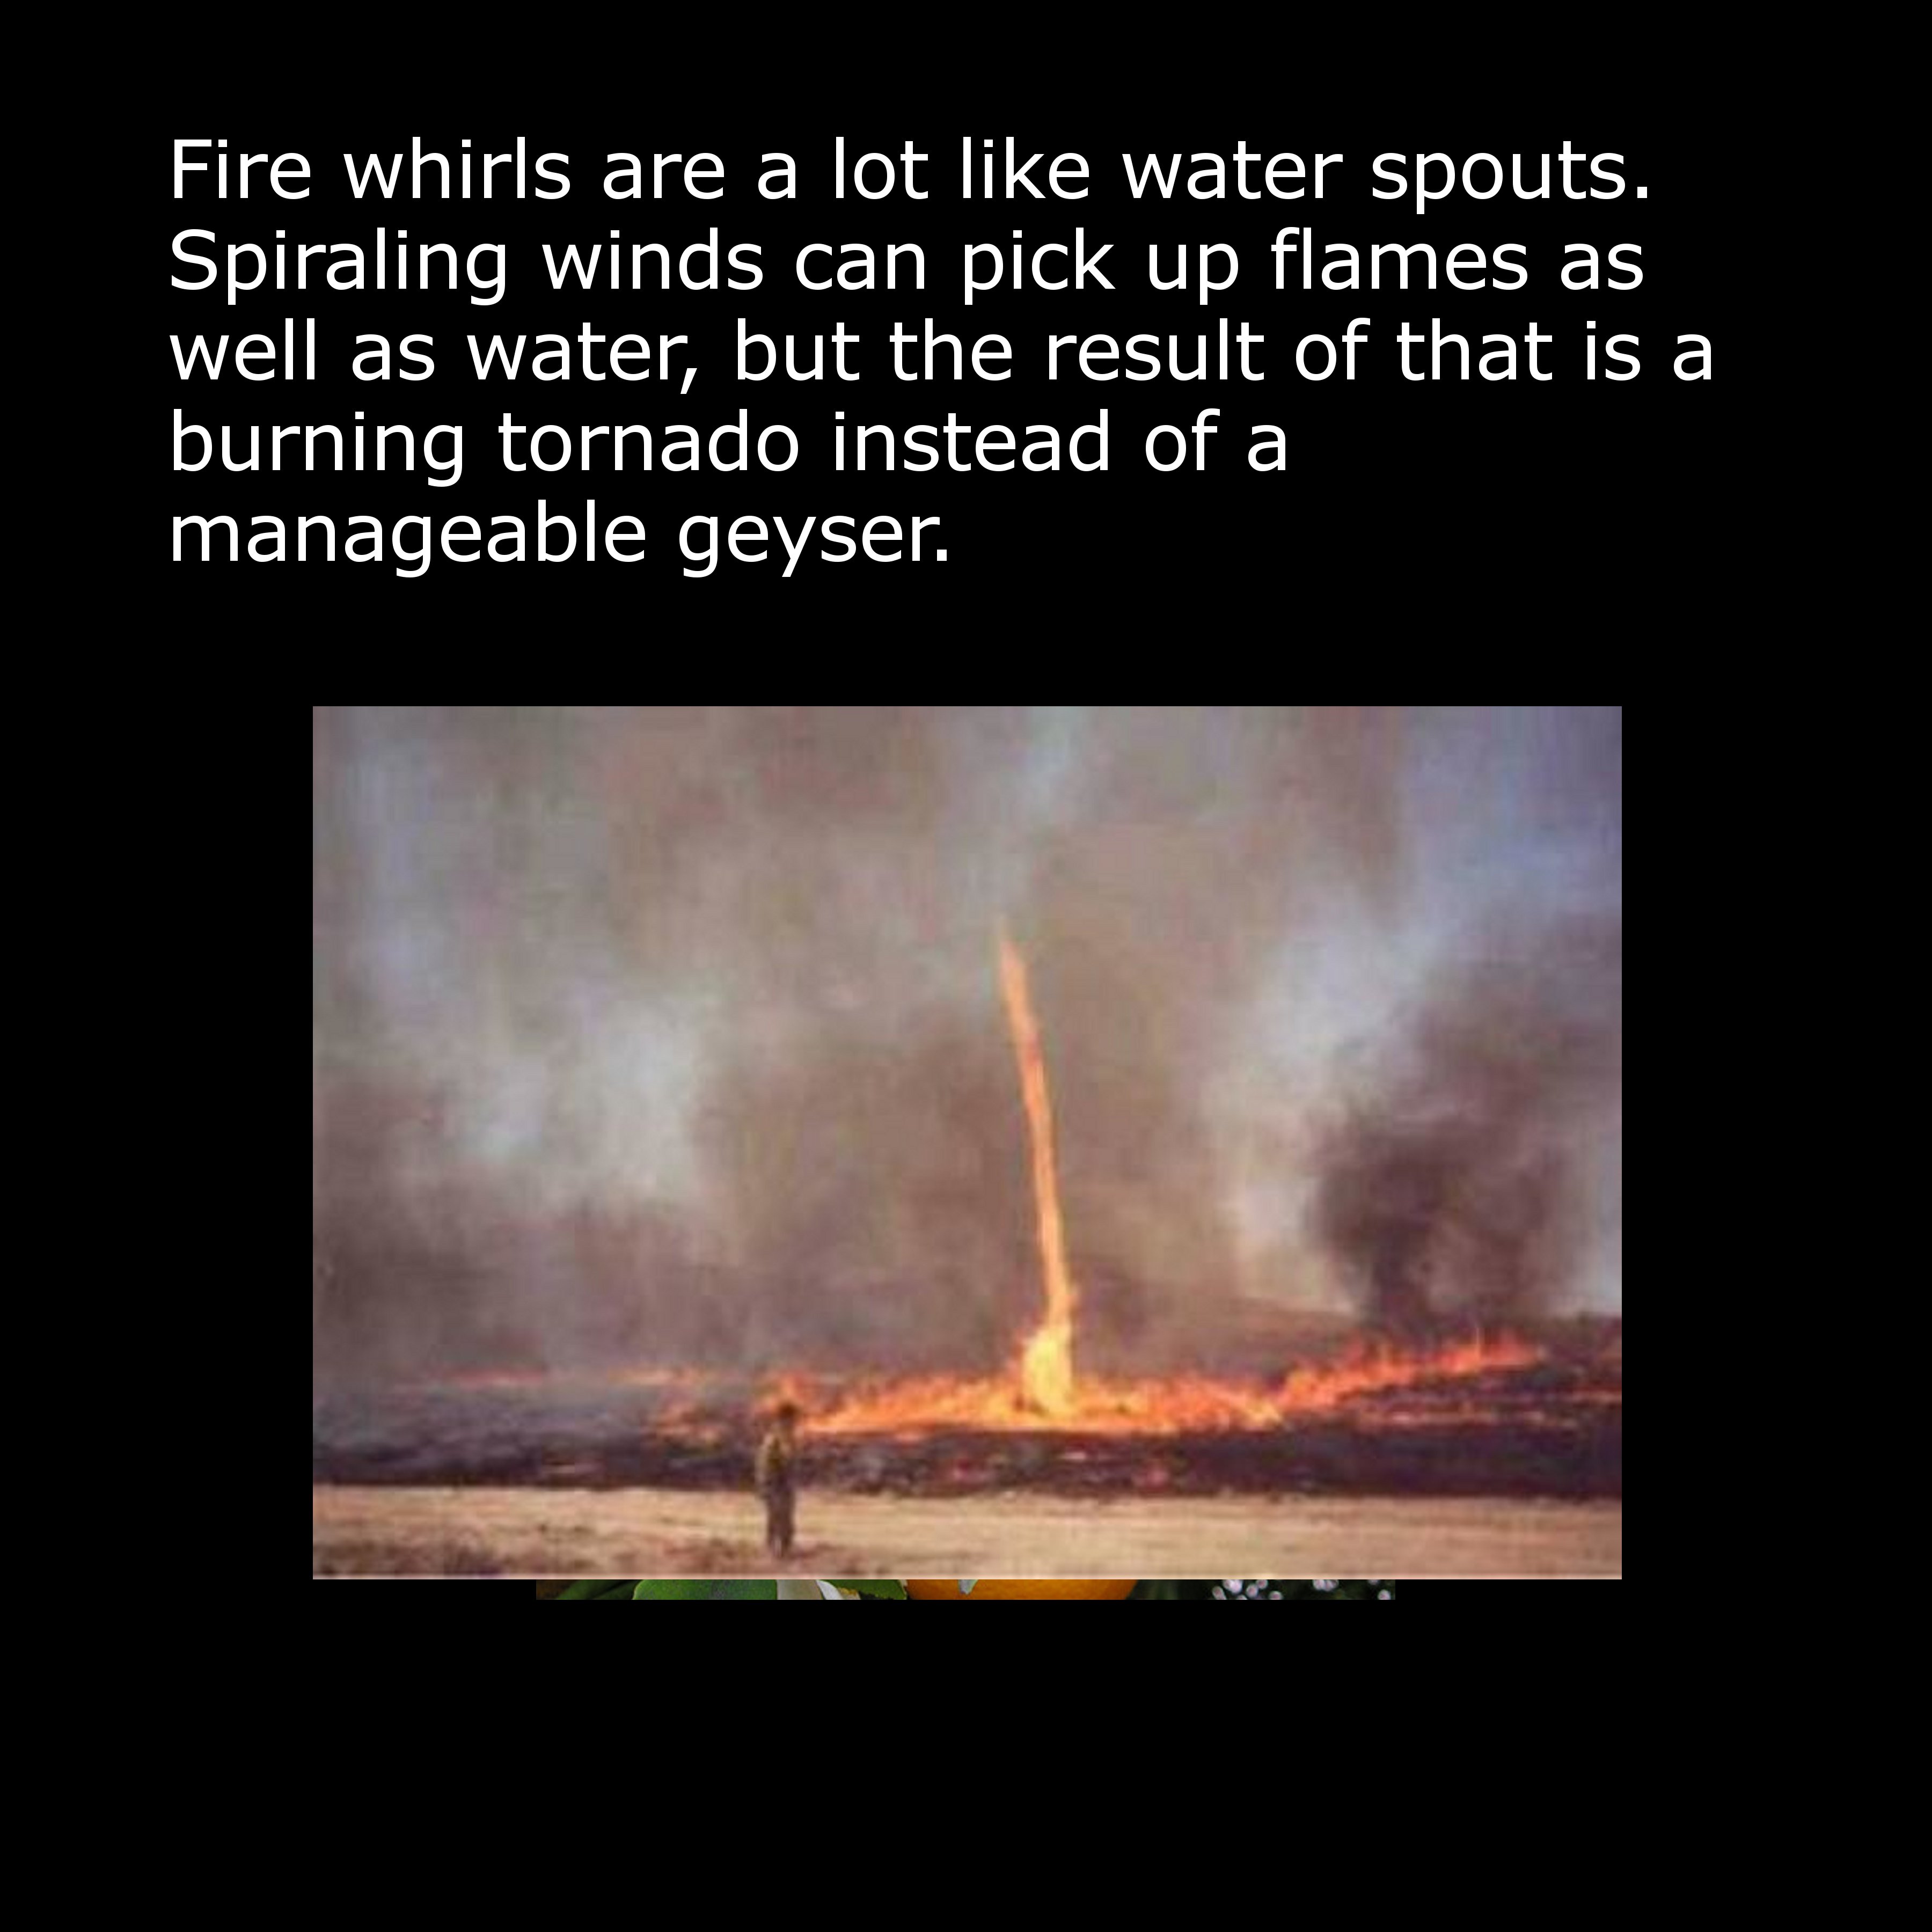 fire whirl - Fire whirls are a lot water spouts. Spiraling winds can pick up flames as well as water, but the result of that is a burning tornado instead of a manageable geyser.